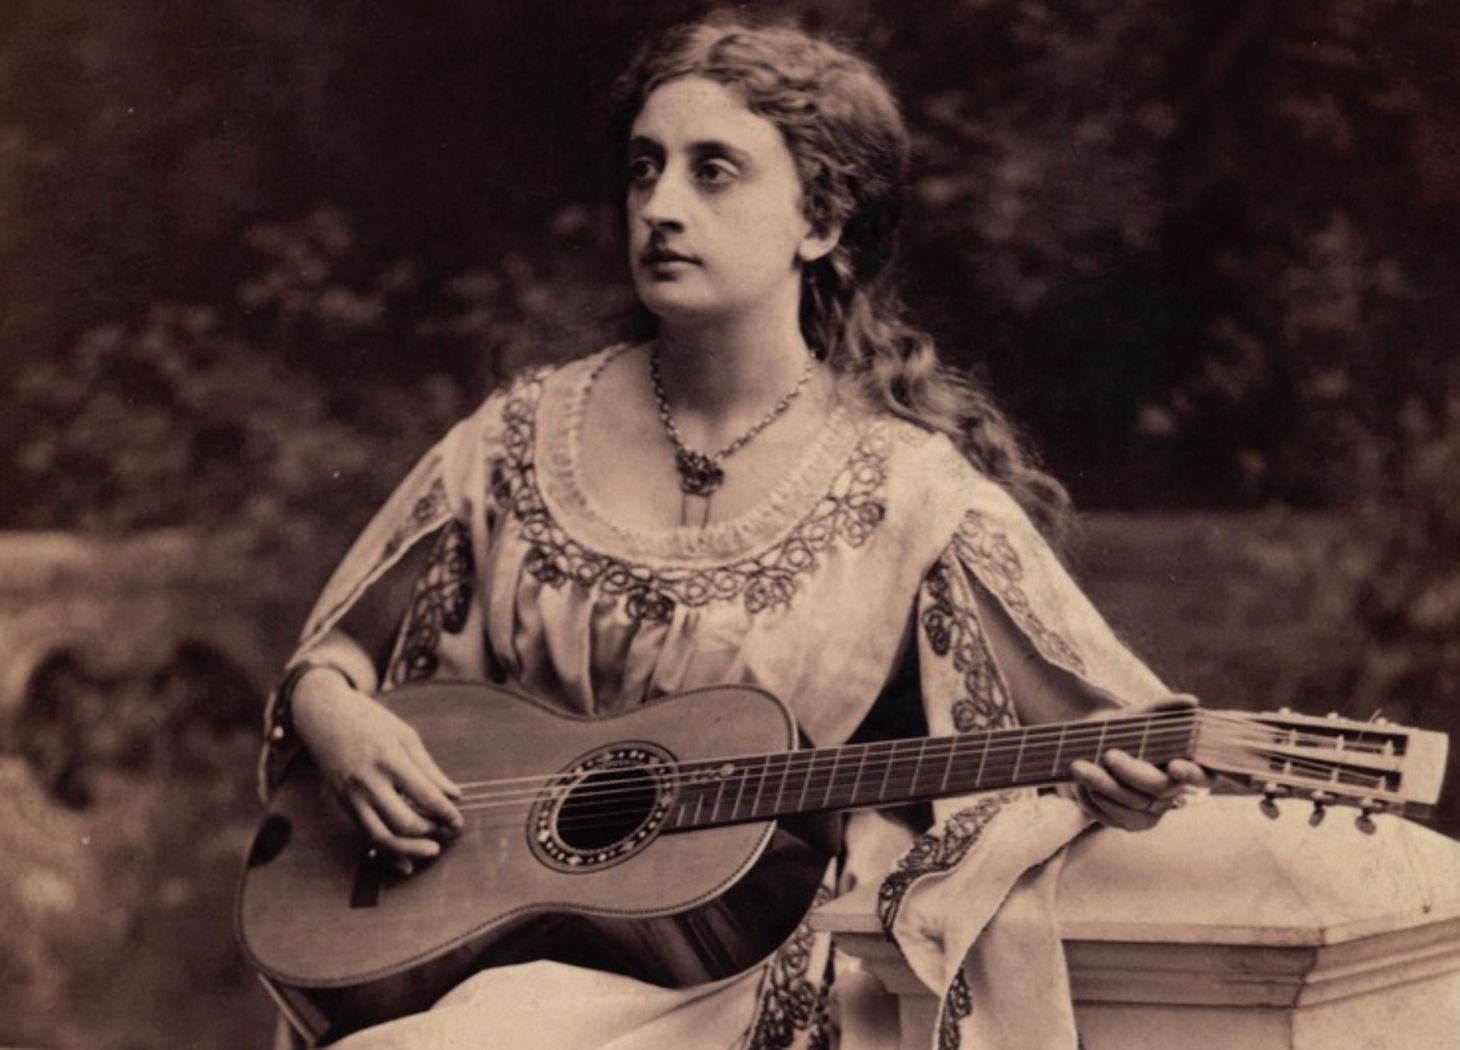 A sepia photo of a real cool woman with long, flowing hair playing acoustic guitar.